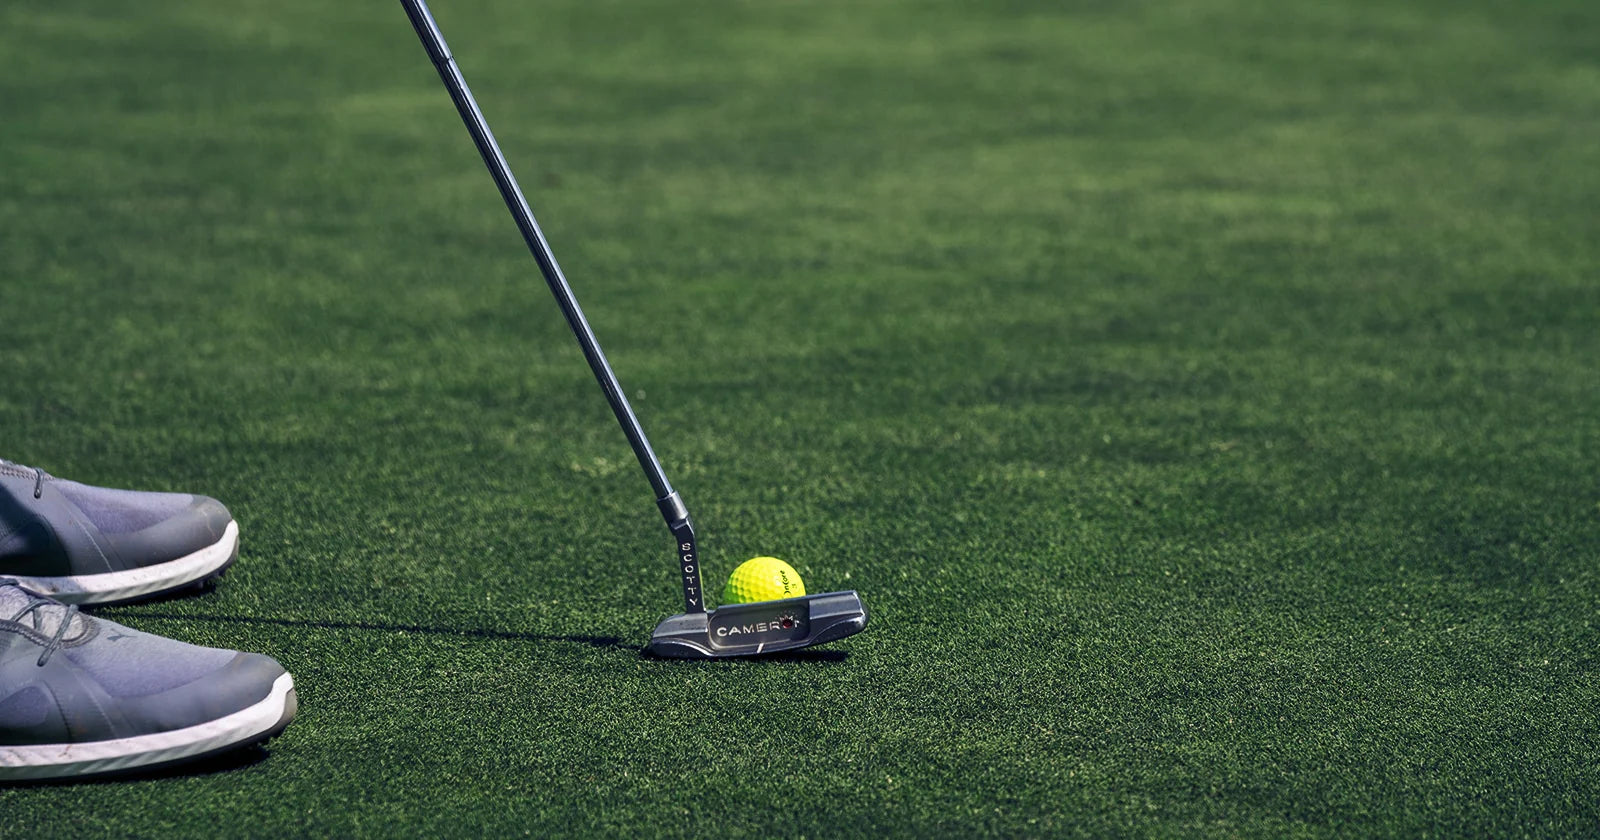 write a blog about Golf ball fitting: How to find the right match for your swing